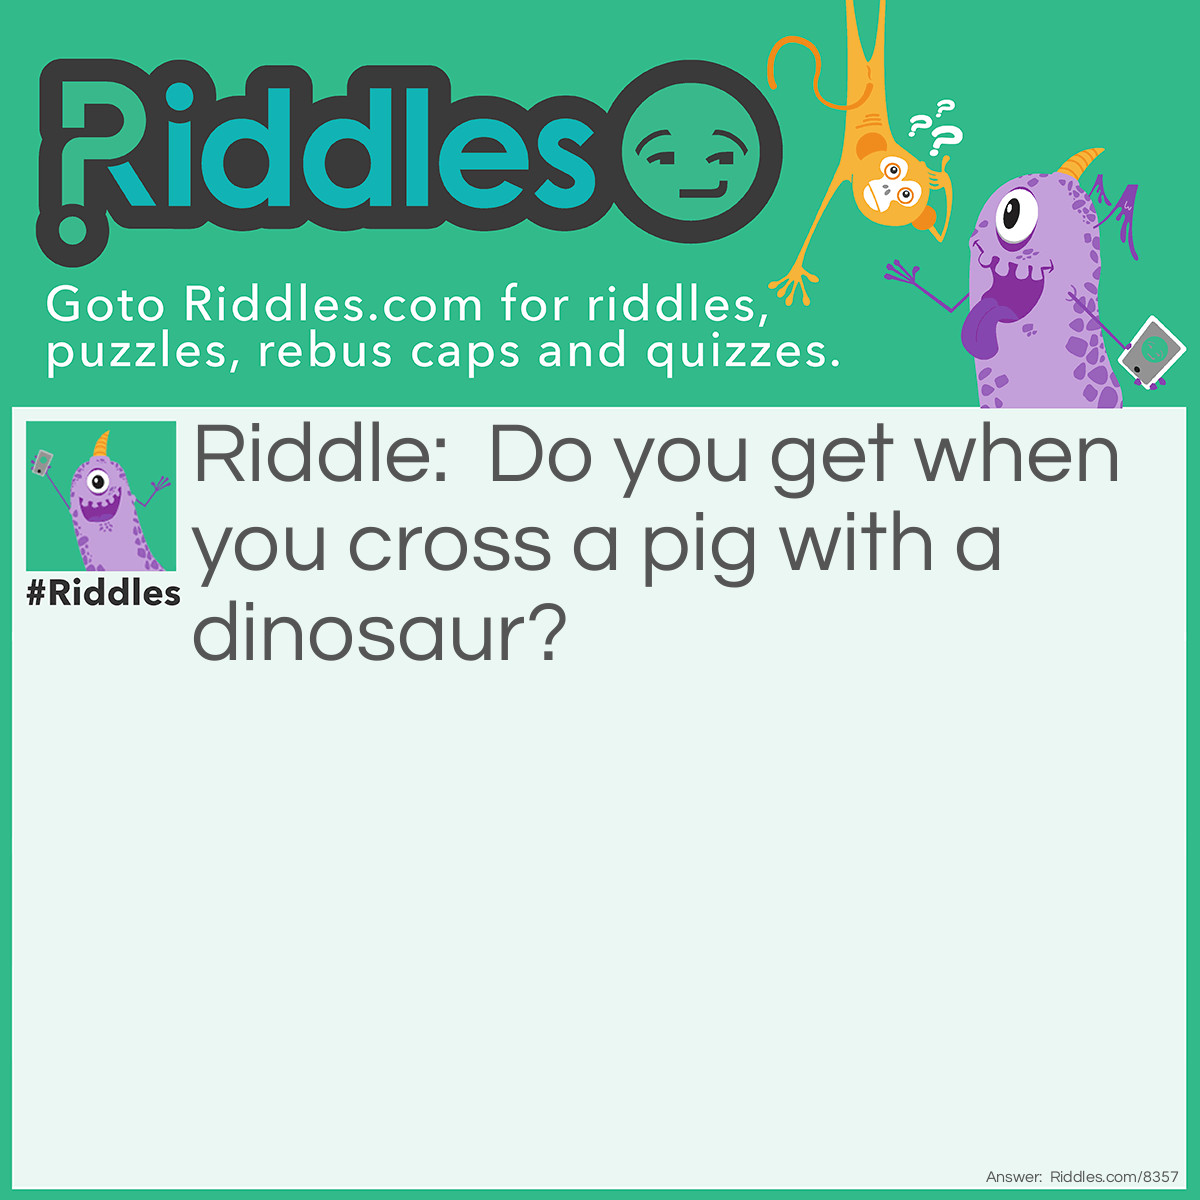 Riddle: What do you get when you cross a pig with a dinosaur? Answer: Jurassic pork!